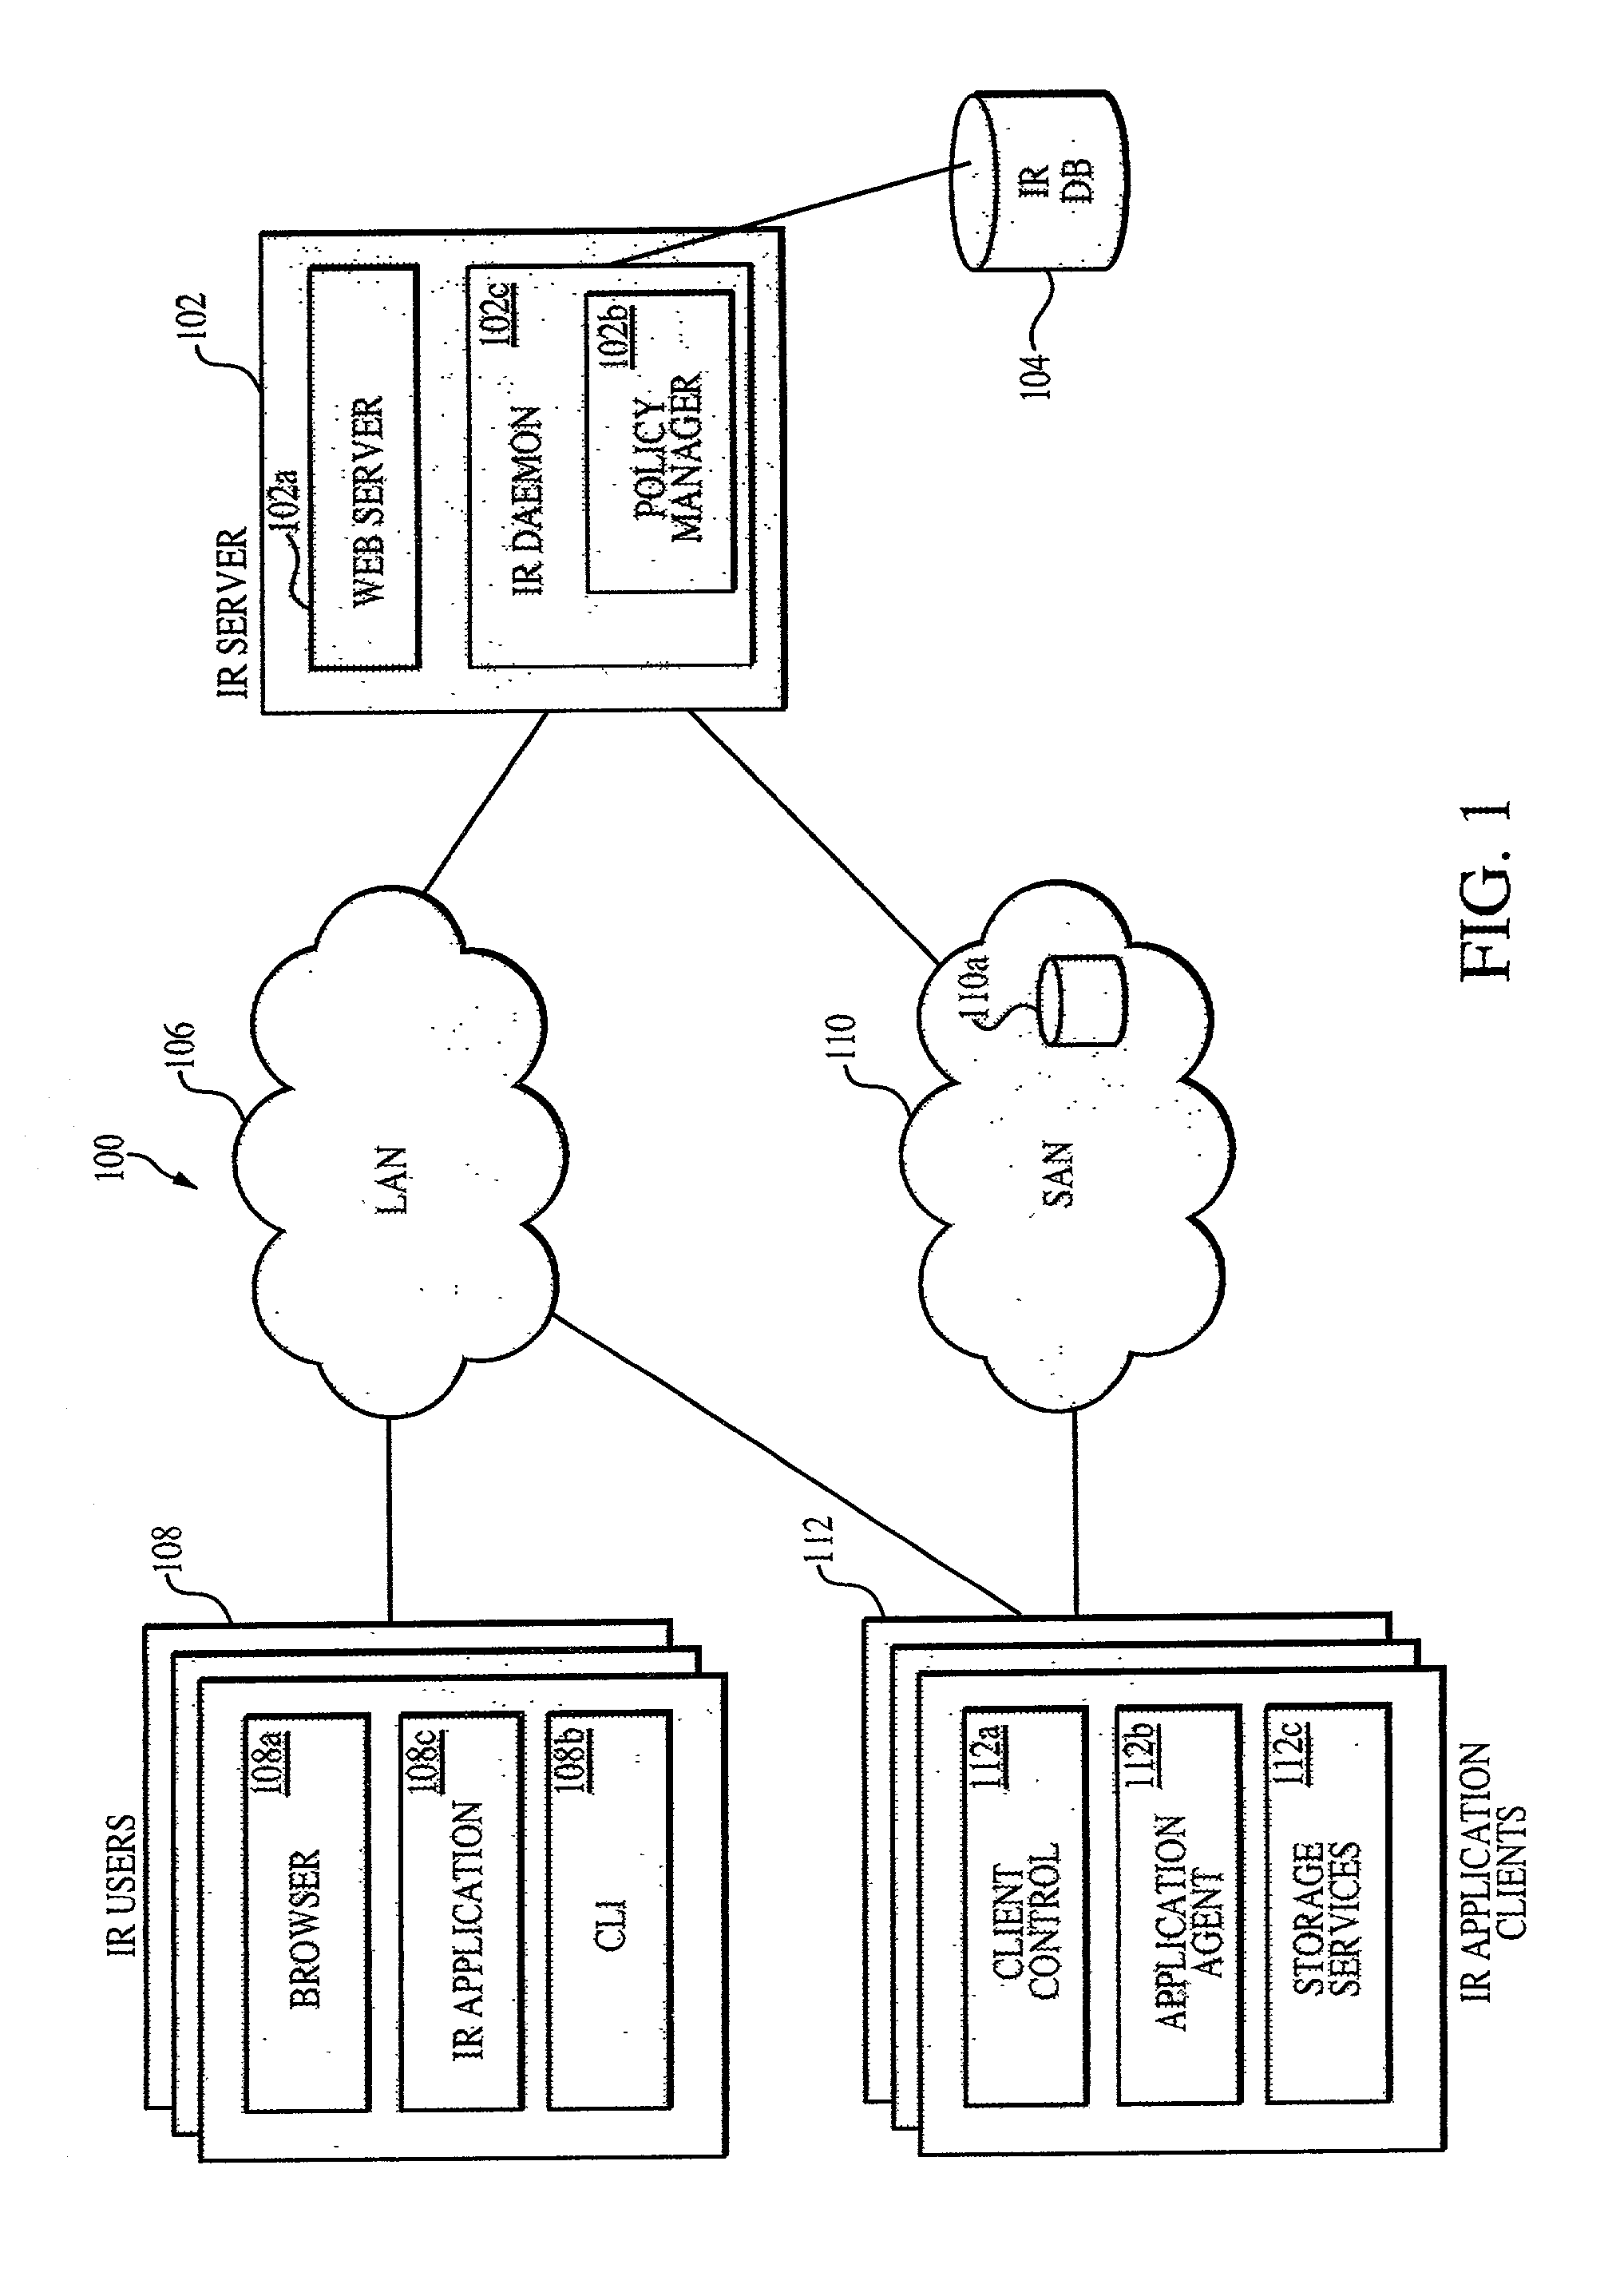 Information replication system having enhanced error detection and recovery